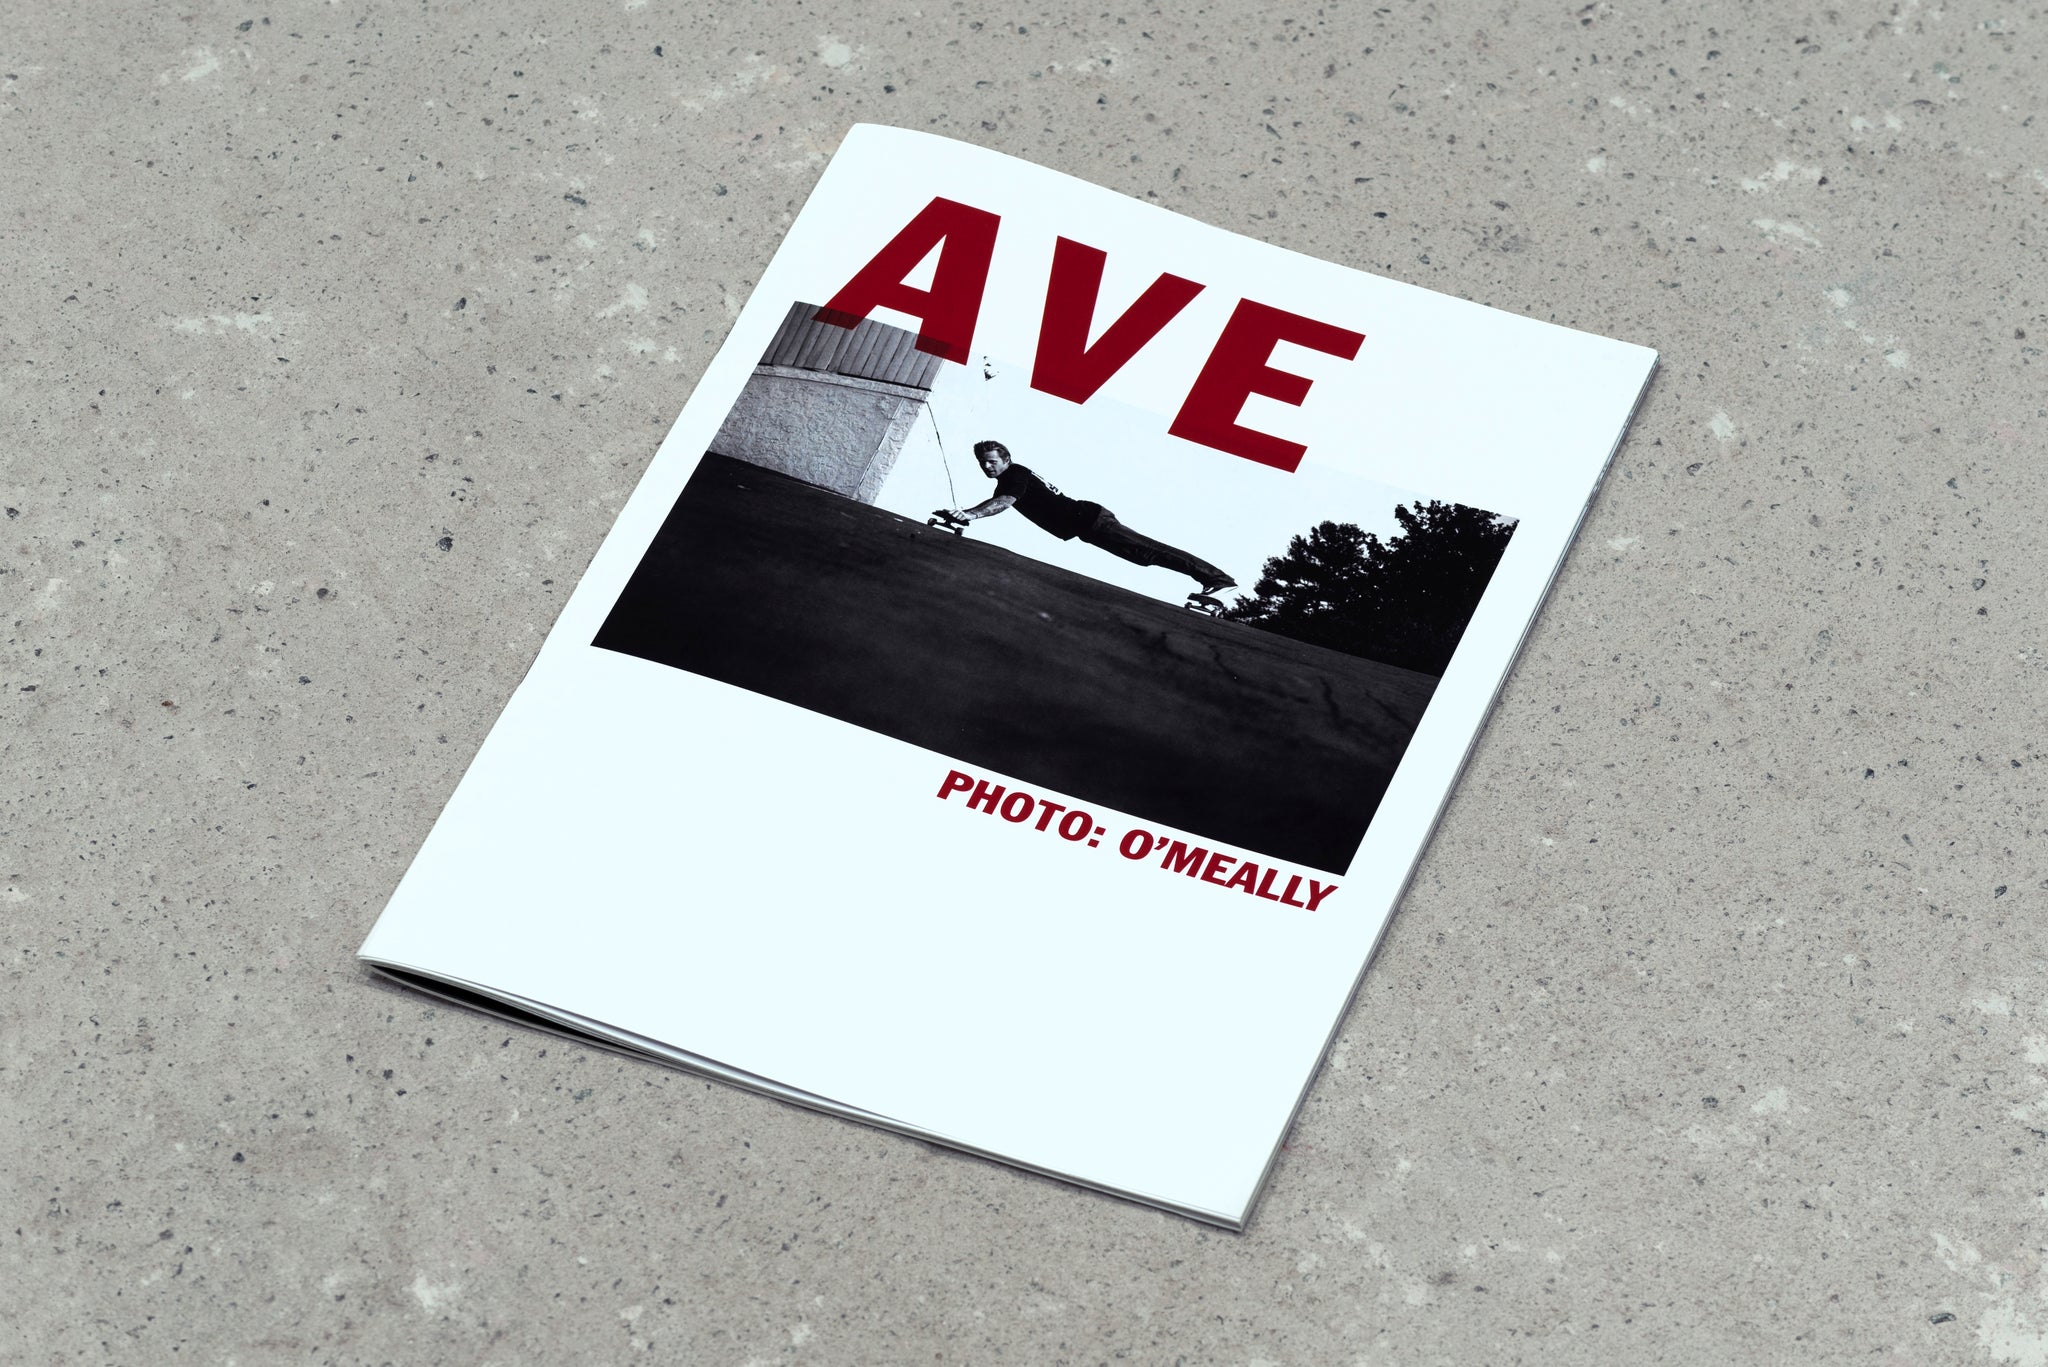 AVE, photo: O'Meally - A print retrospective celebrating the career of Anthony Van Engelen through the lens of Mike O'Meally